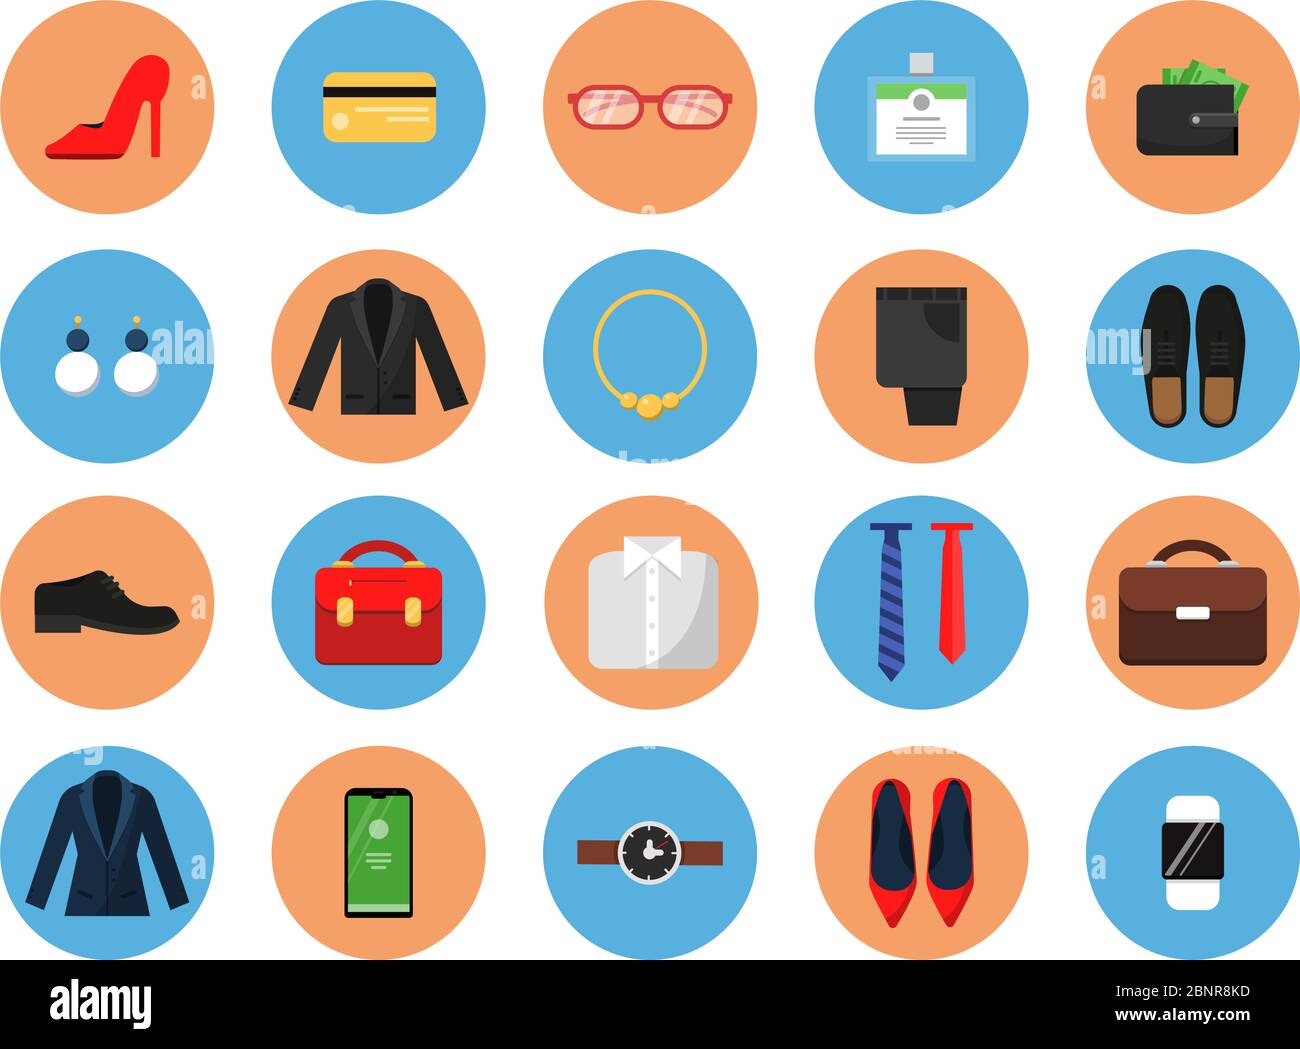 Business wardrobe icons. Office style clothes for male and female work casual fashion skirt suit jacket hat bag vector colored symbols Stock Vector